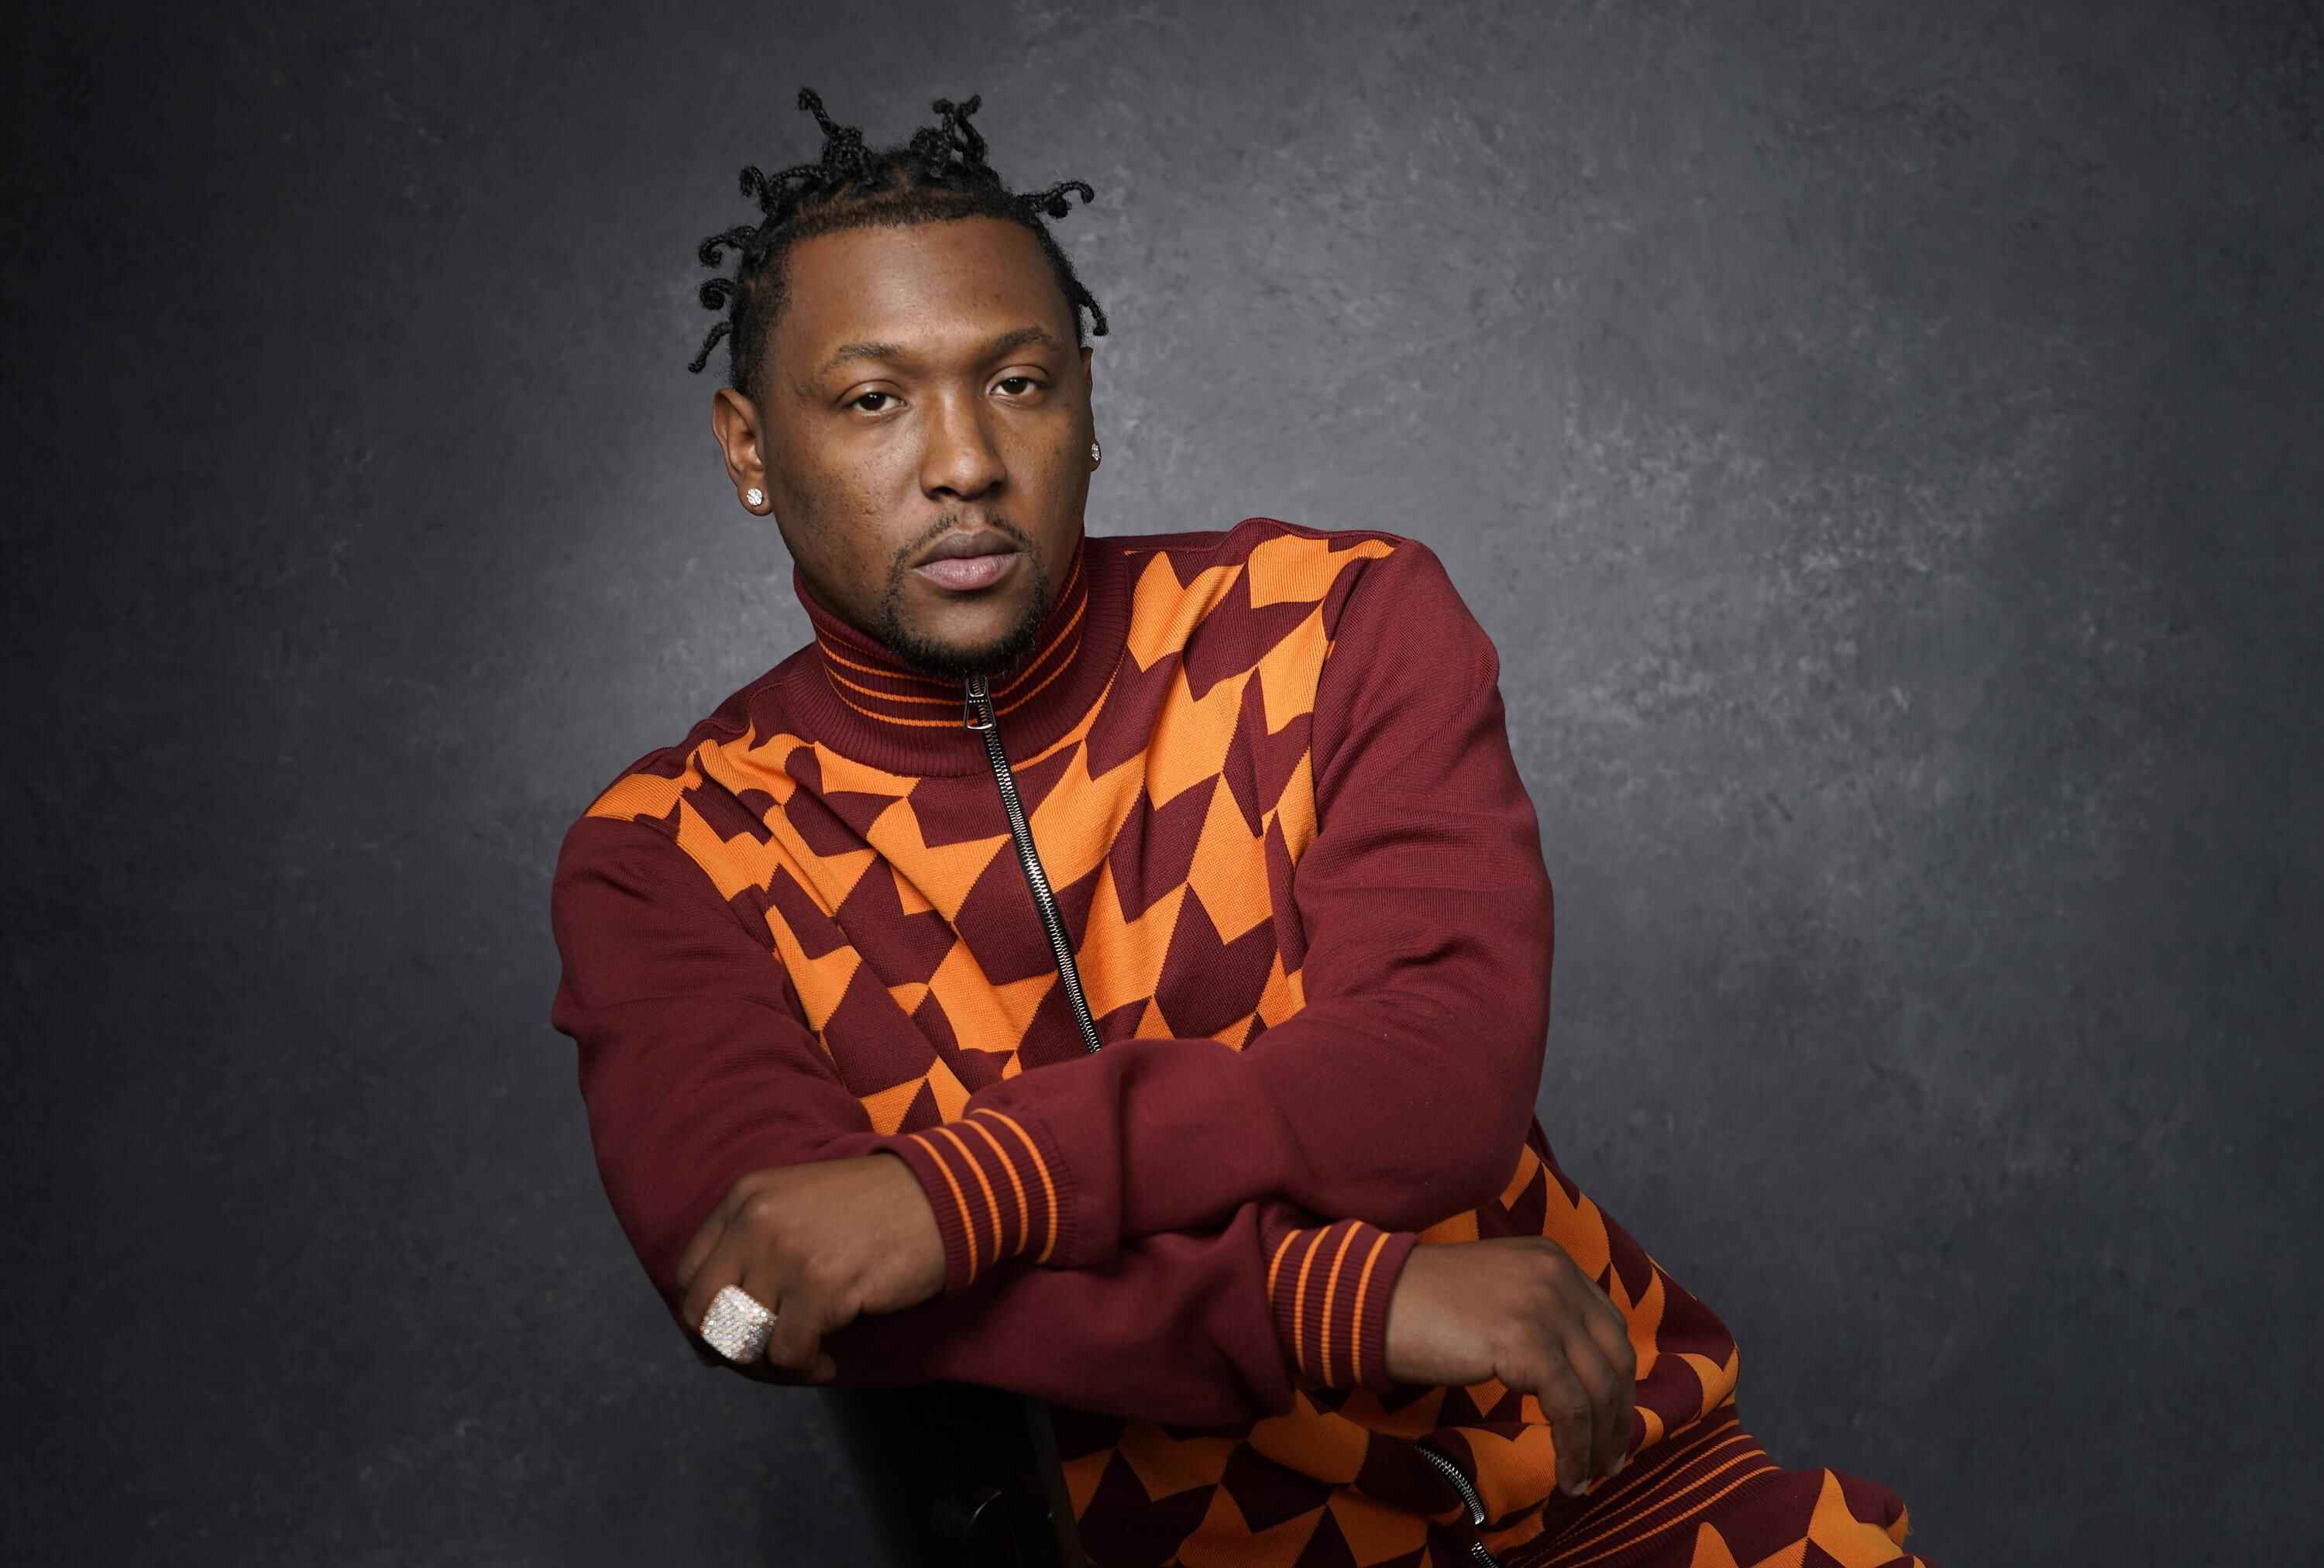 hit-boy-predicts-grammy-win-for-producer-of-the-year-and-plans-to-freestyle-speech